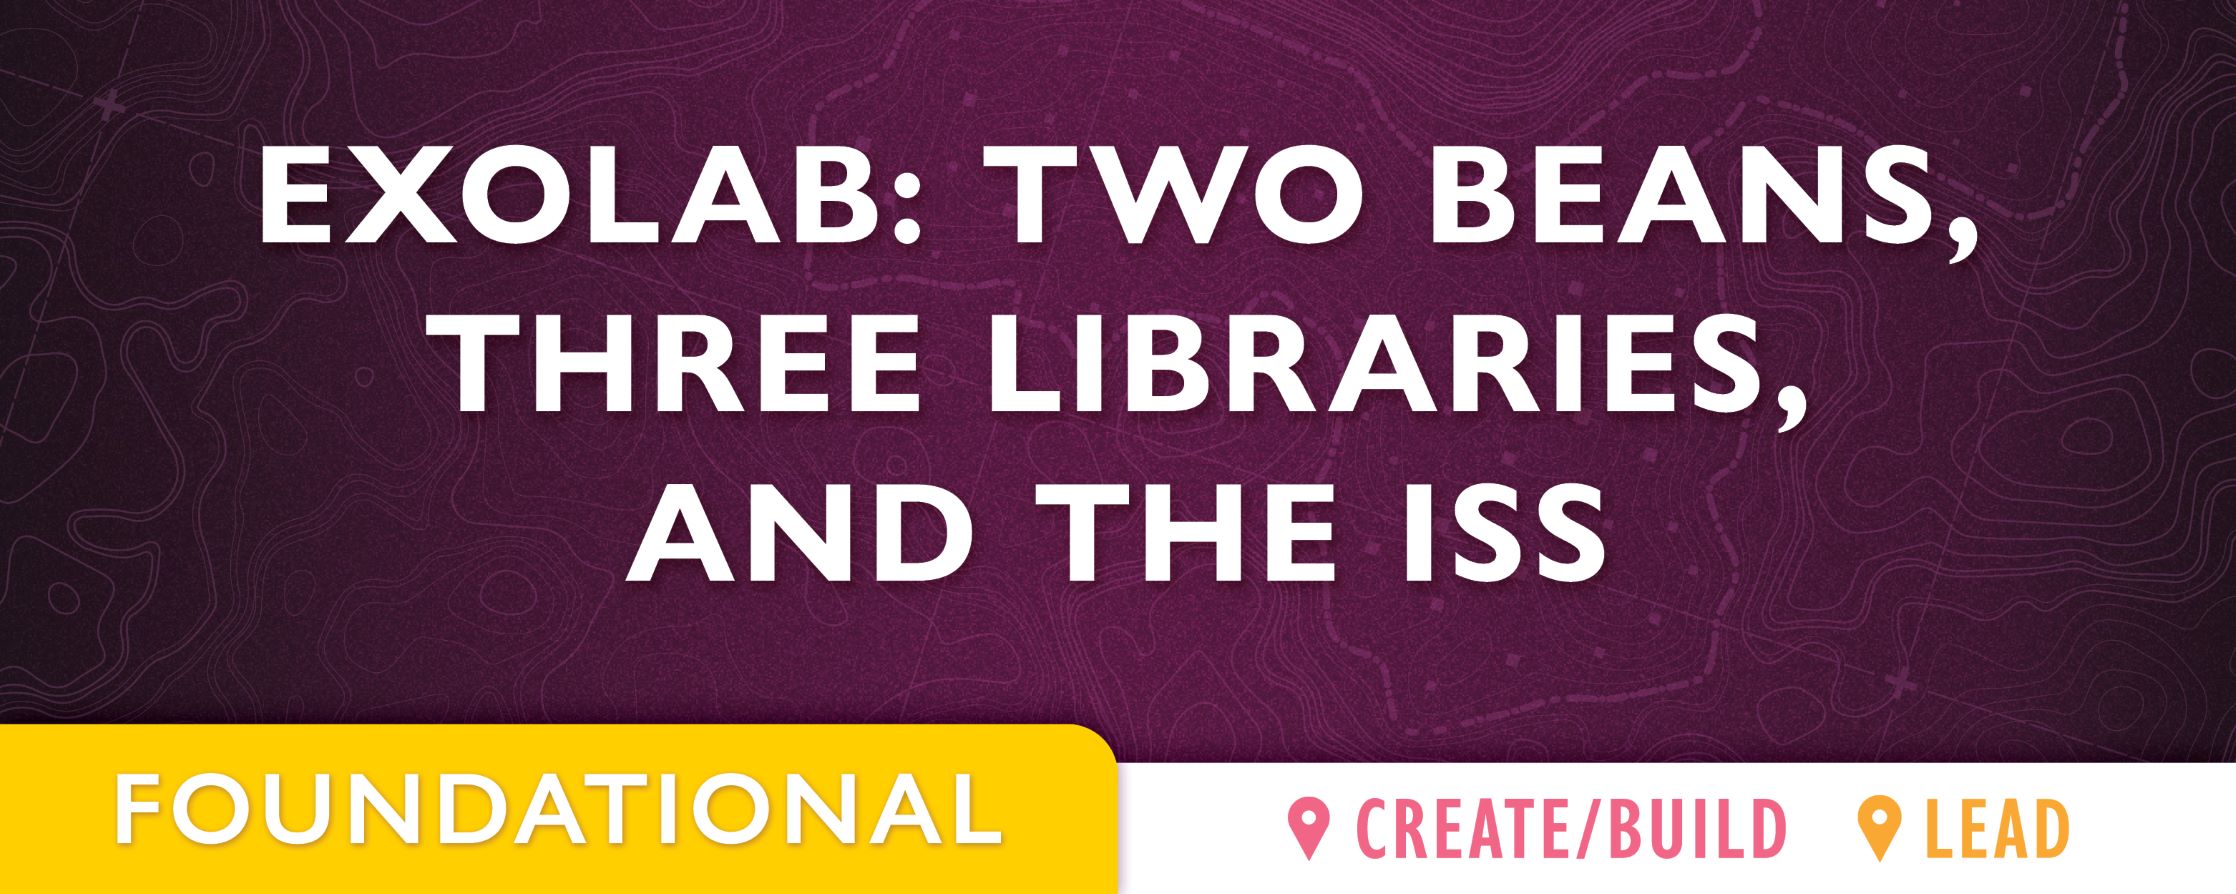 purple background with text: ExoLab: Two beans, Three libraries, and the ISS